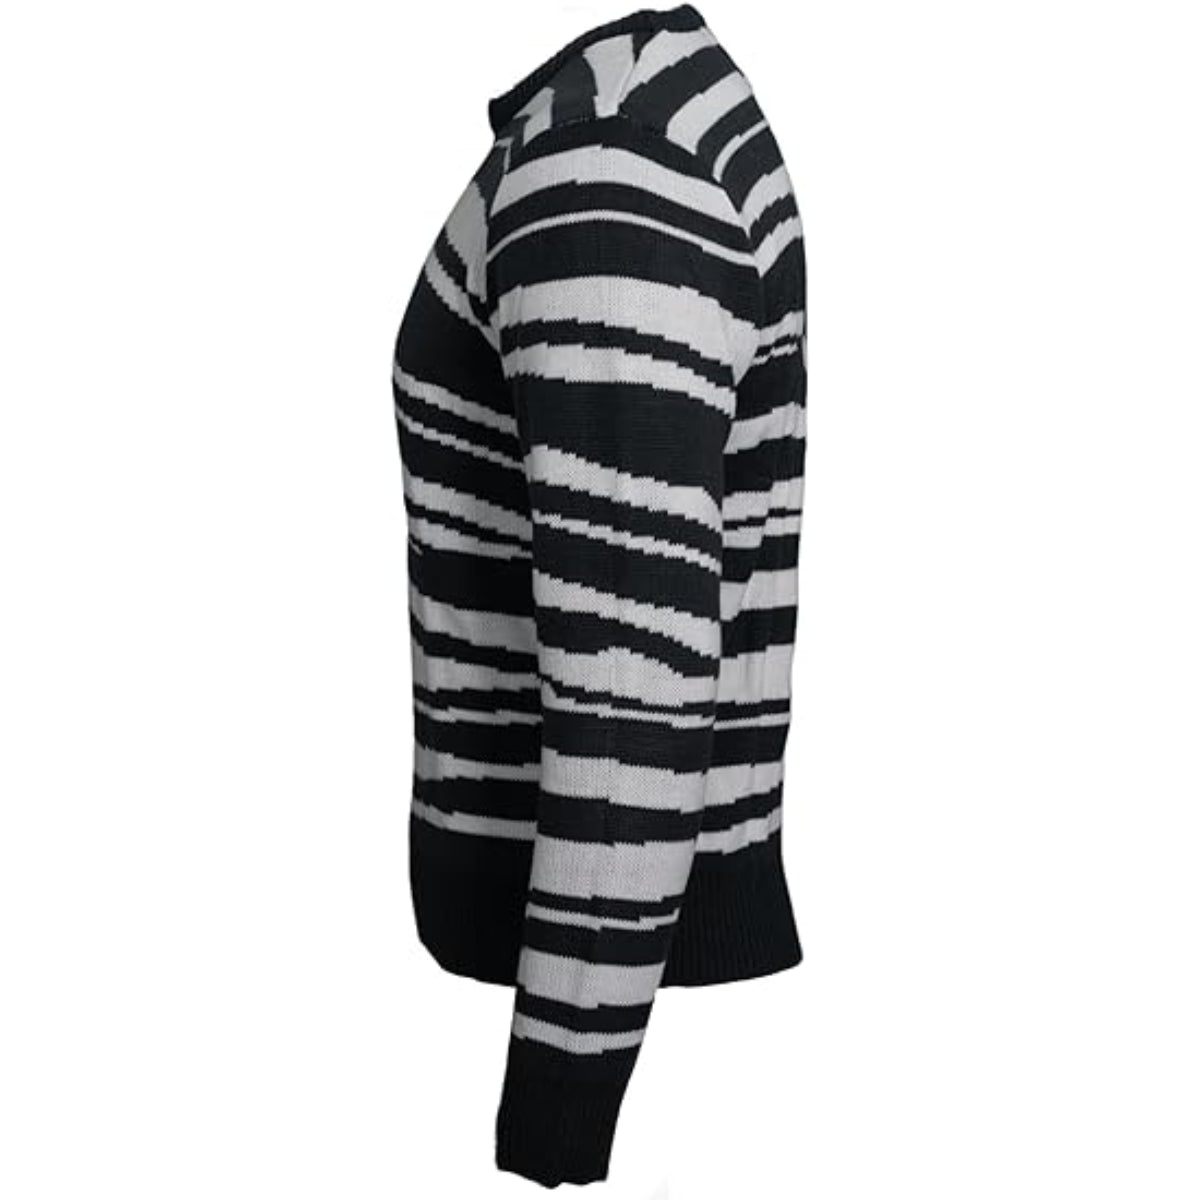 Pugley Spooky Black and White Sweater for Cosplay Perfect for Your Spooky Family Halloween Costume Side